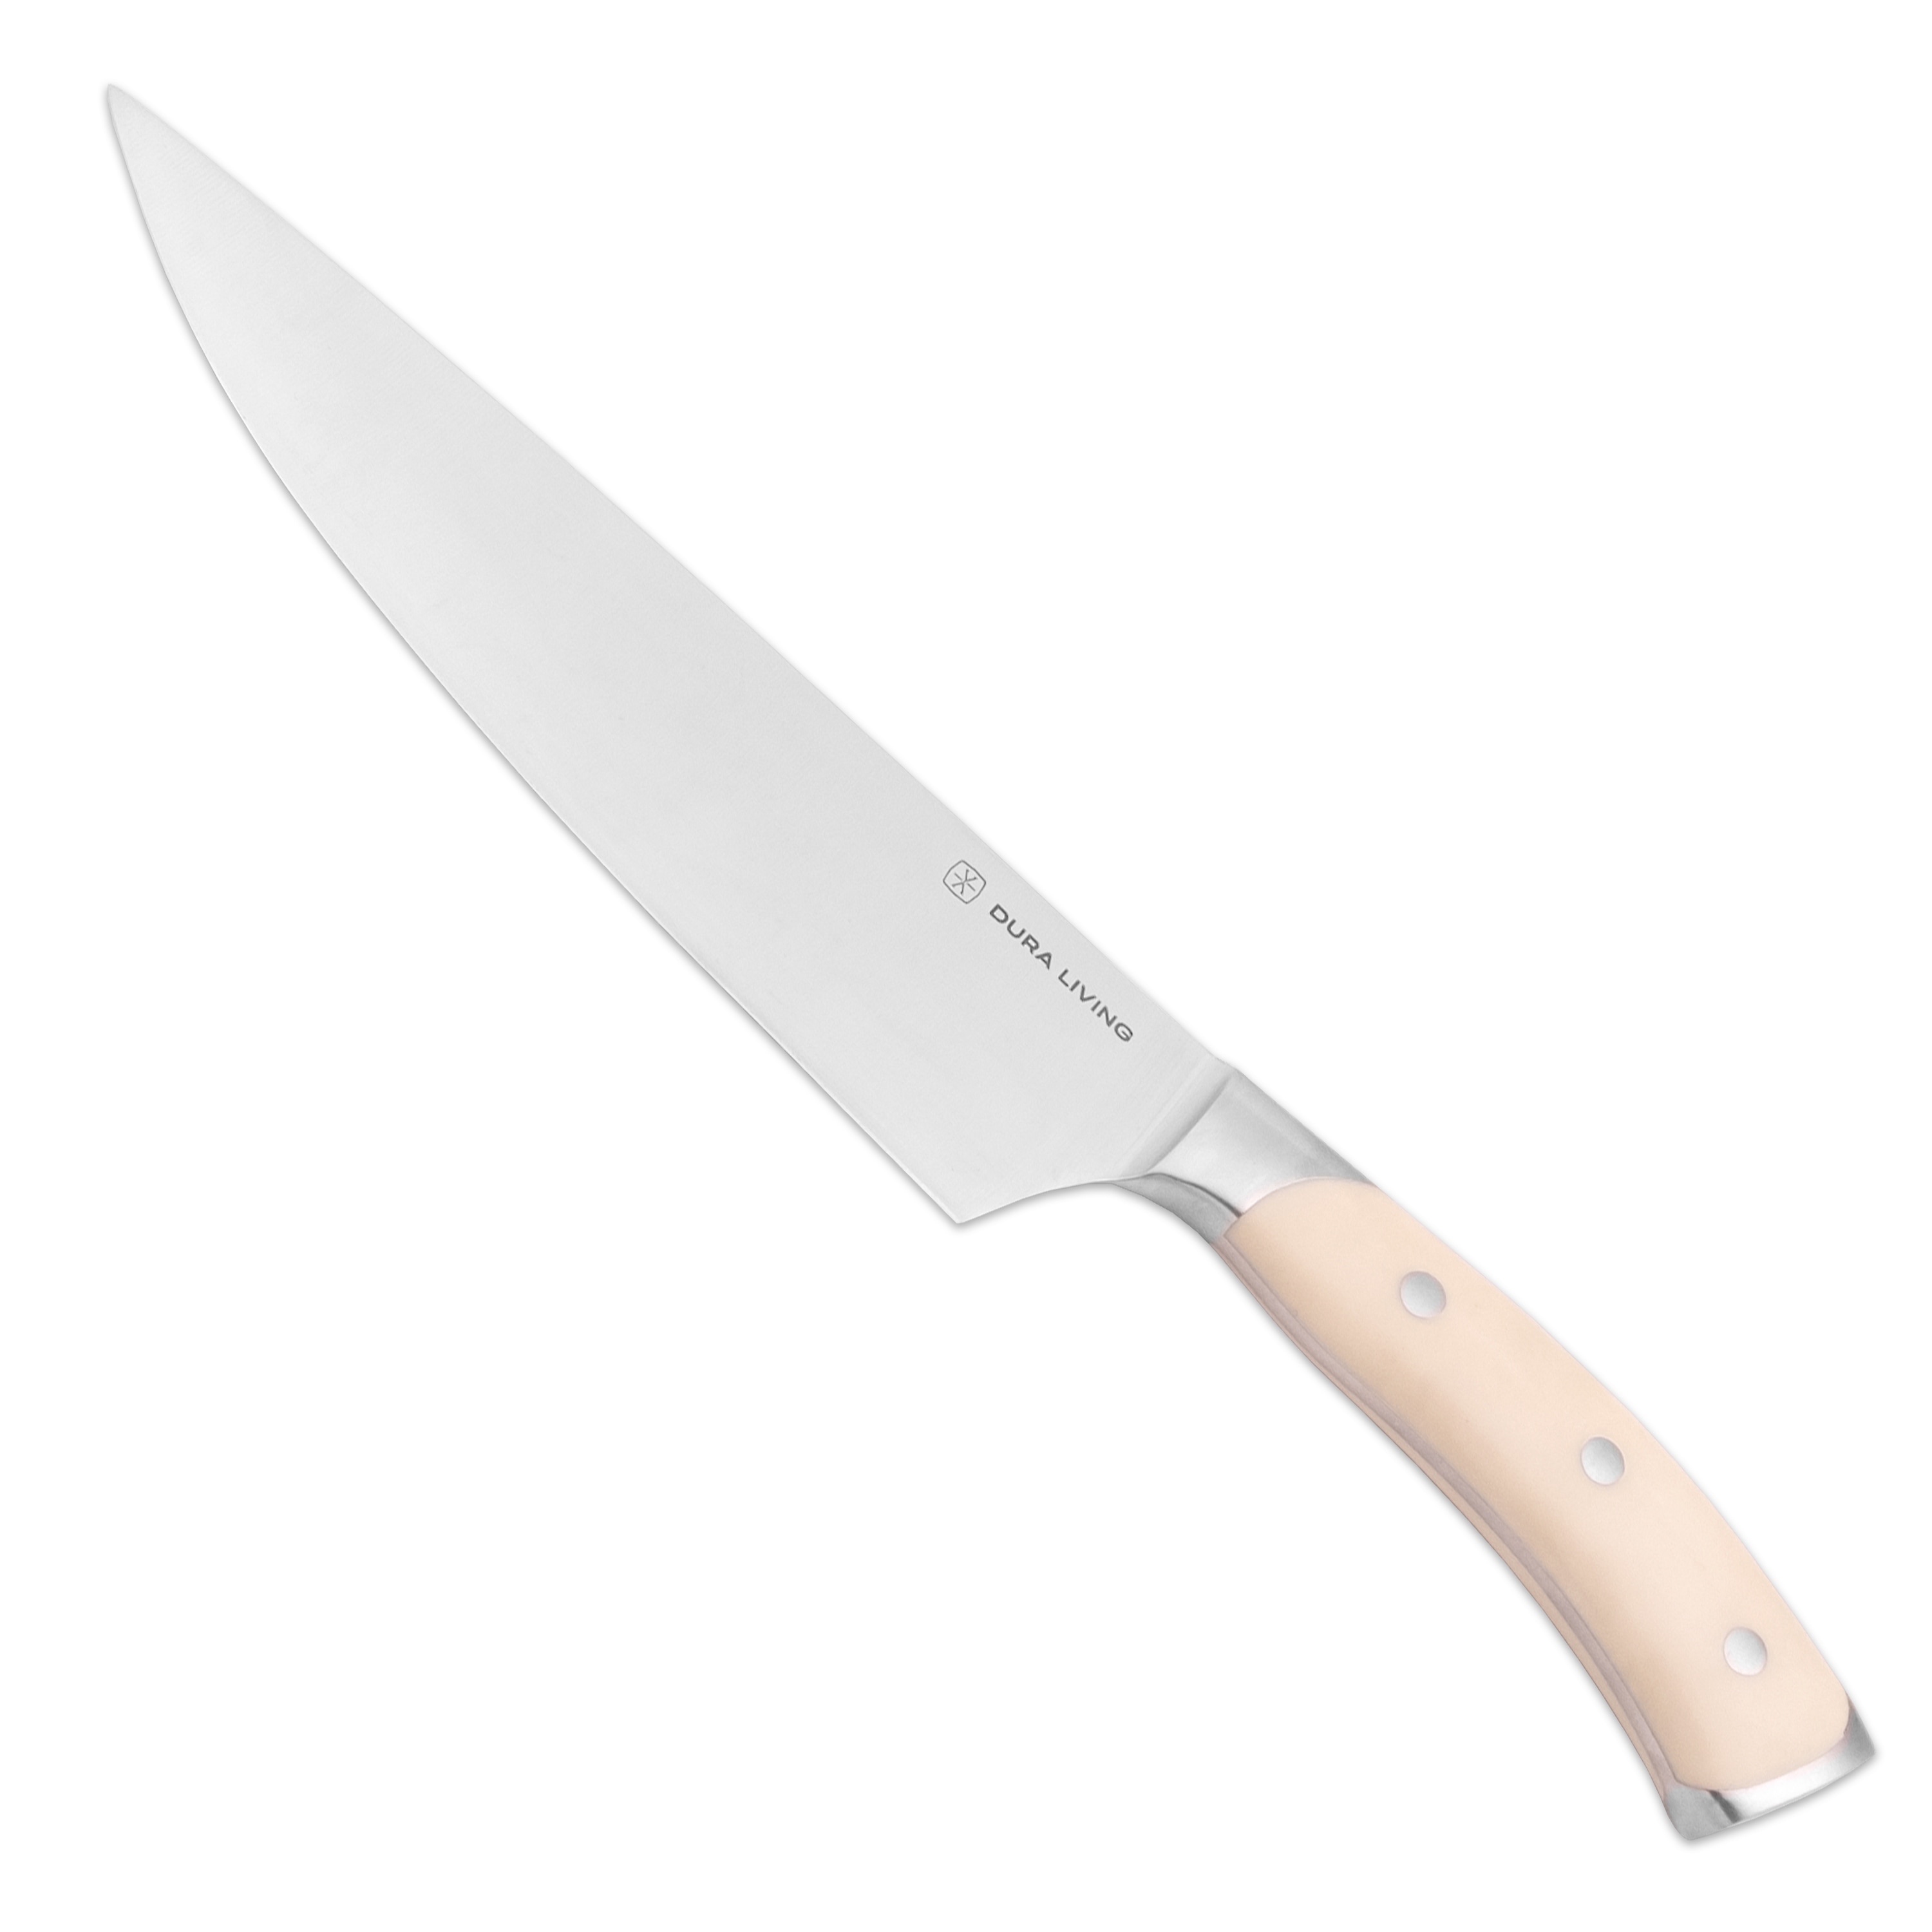 Dura Living Chef Knife - 8 Inch Professional Forged Kitchen Knife - High Carbon German Quality Stainless Steel, Cream - 8 inches